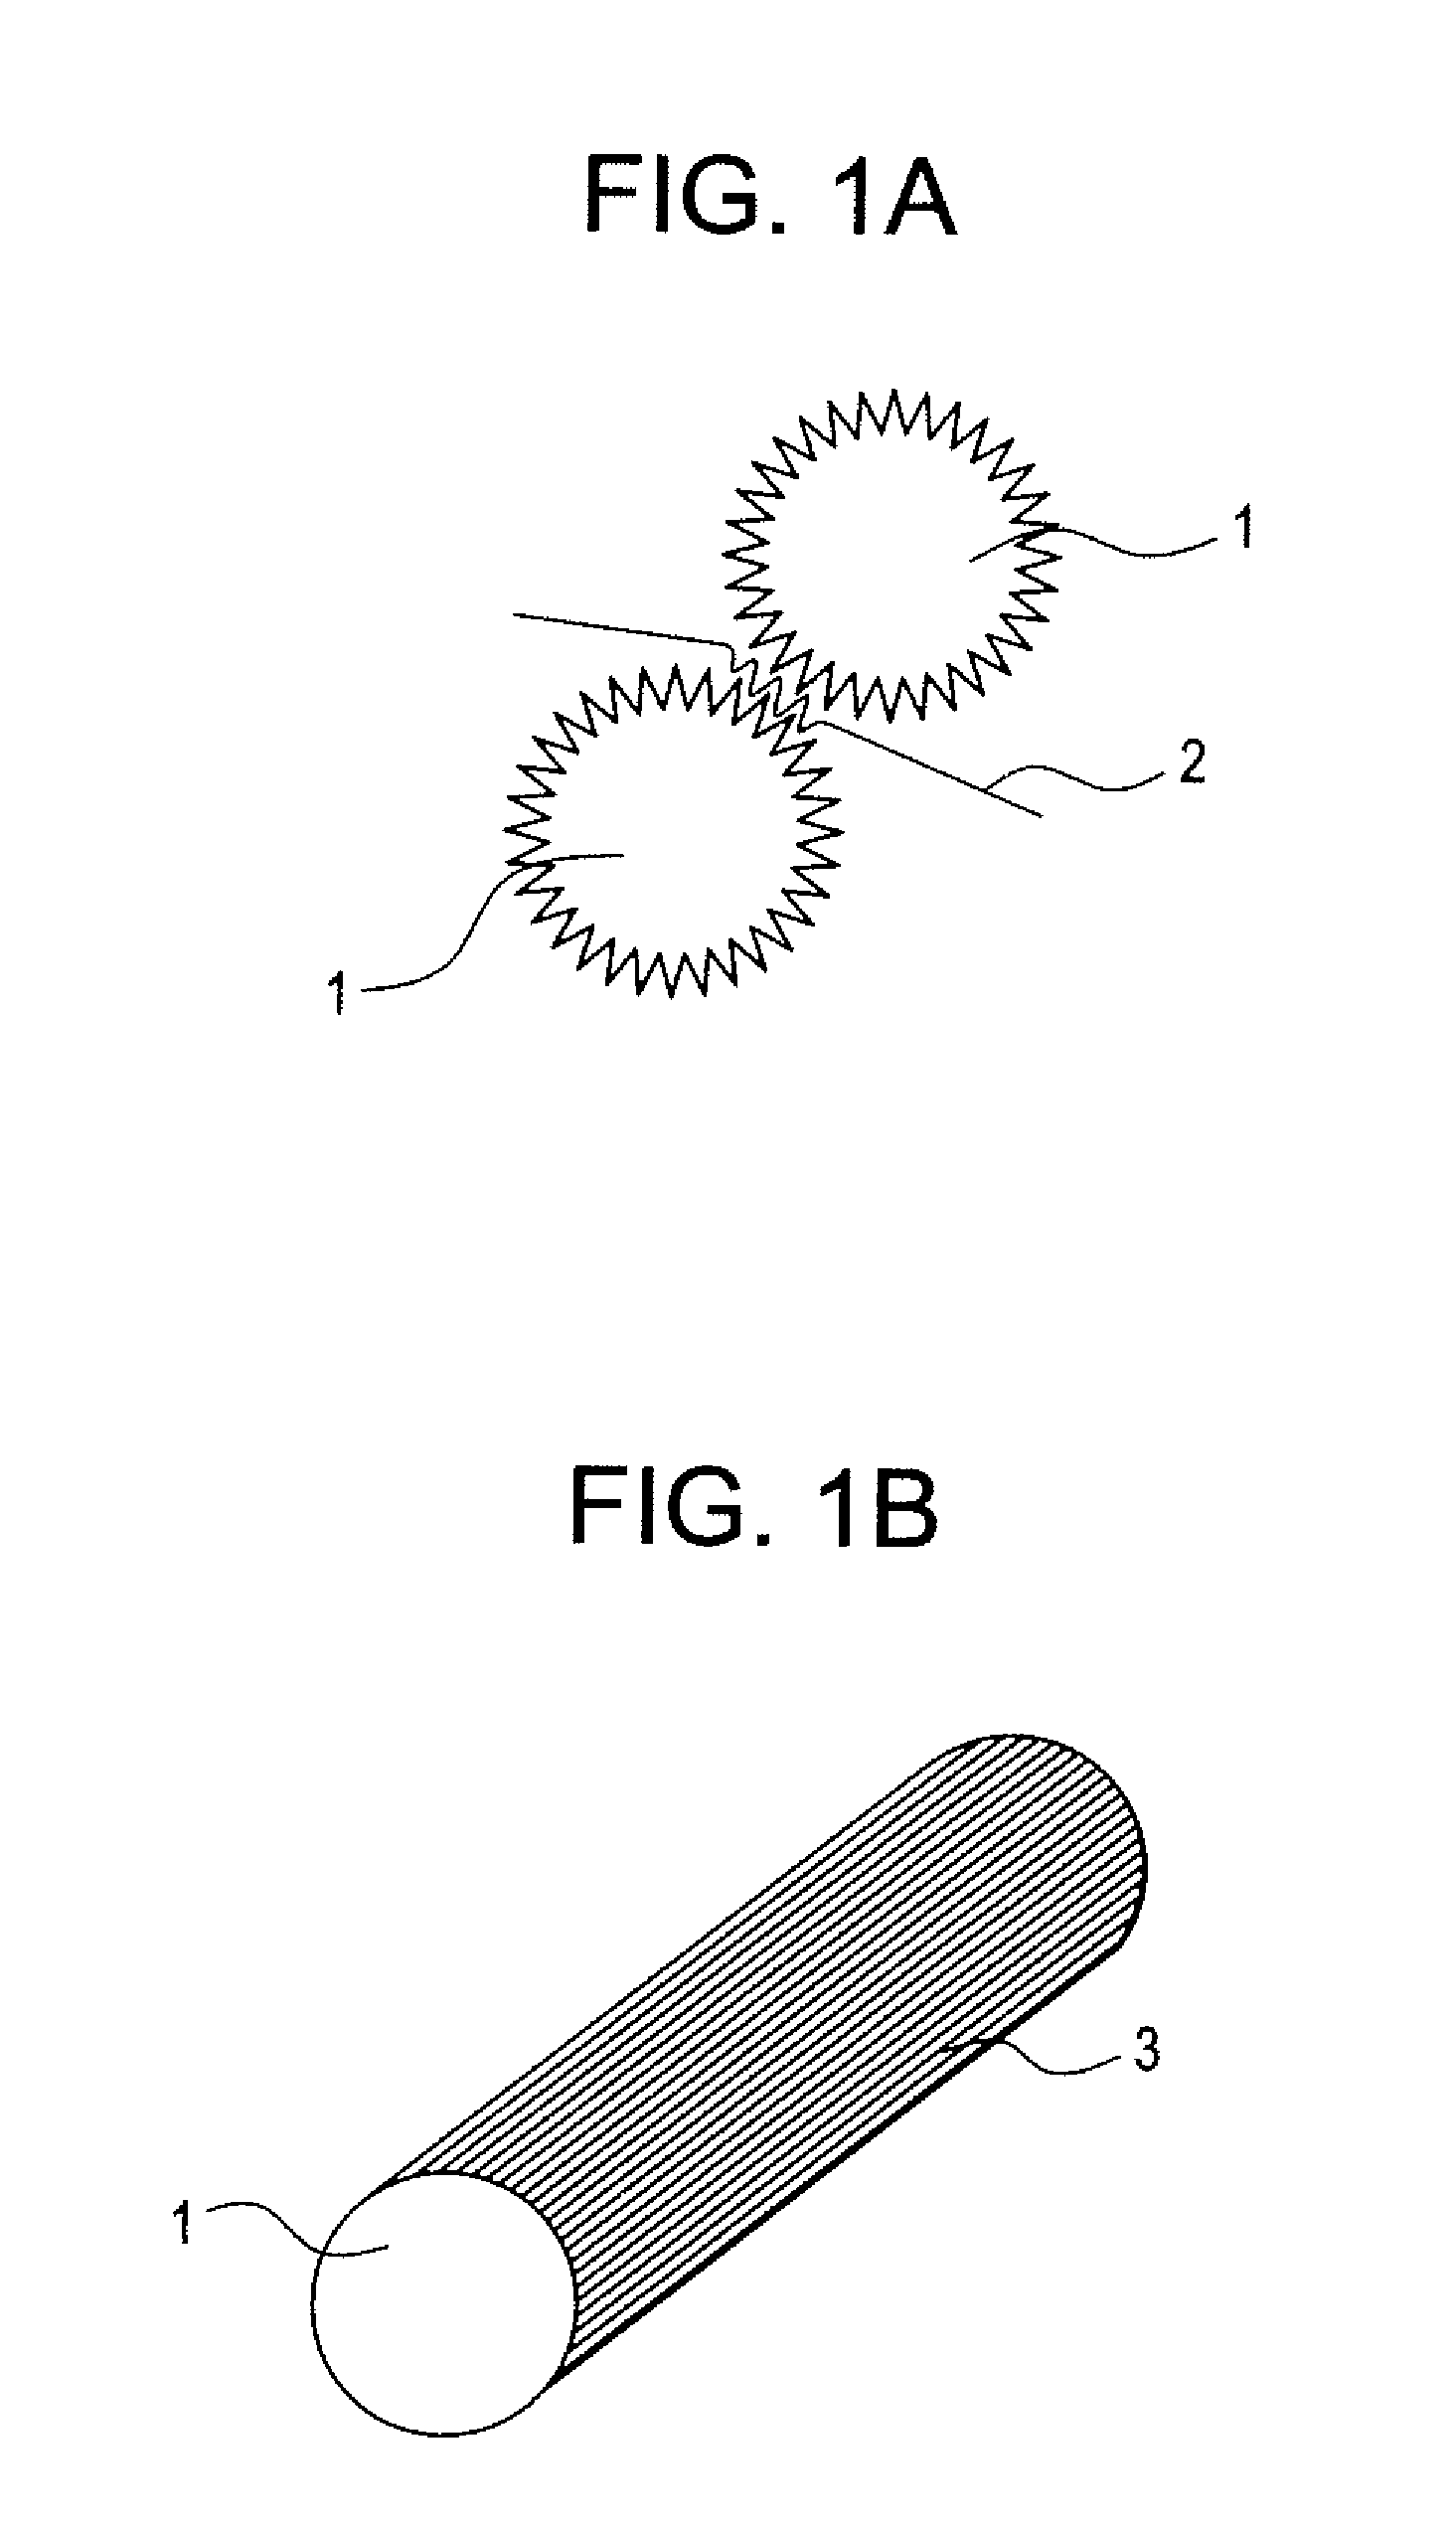 Films, articles prepared therefrom, and methods of making the same